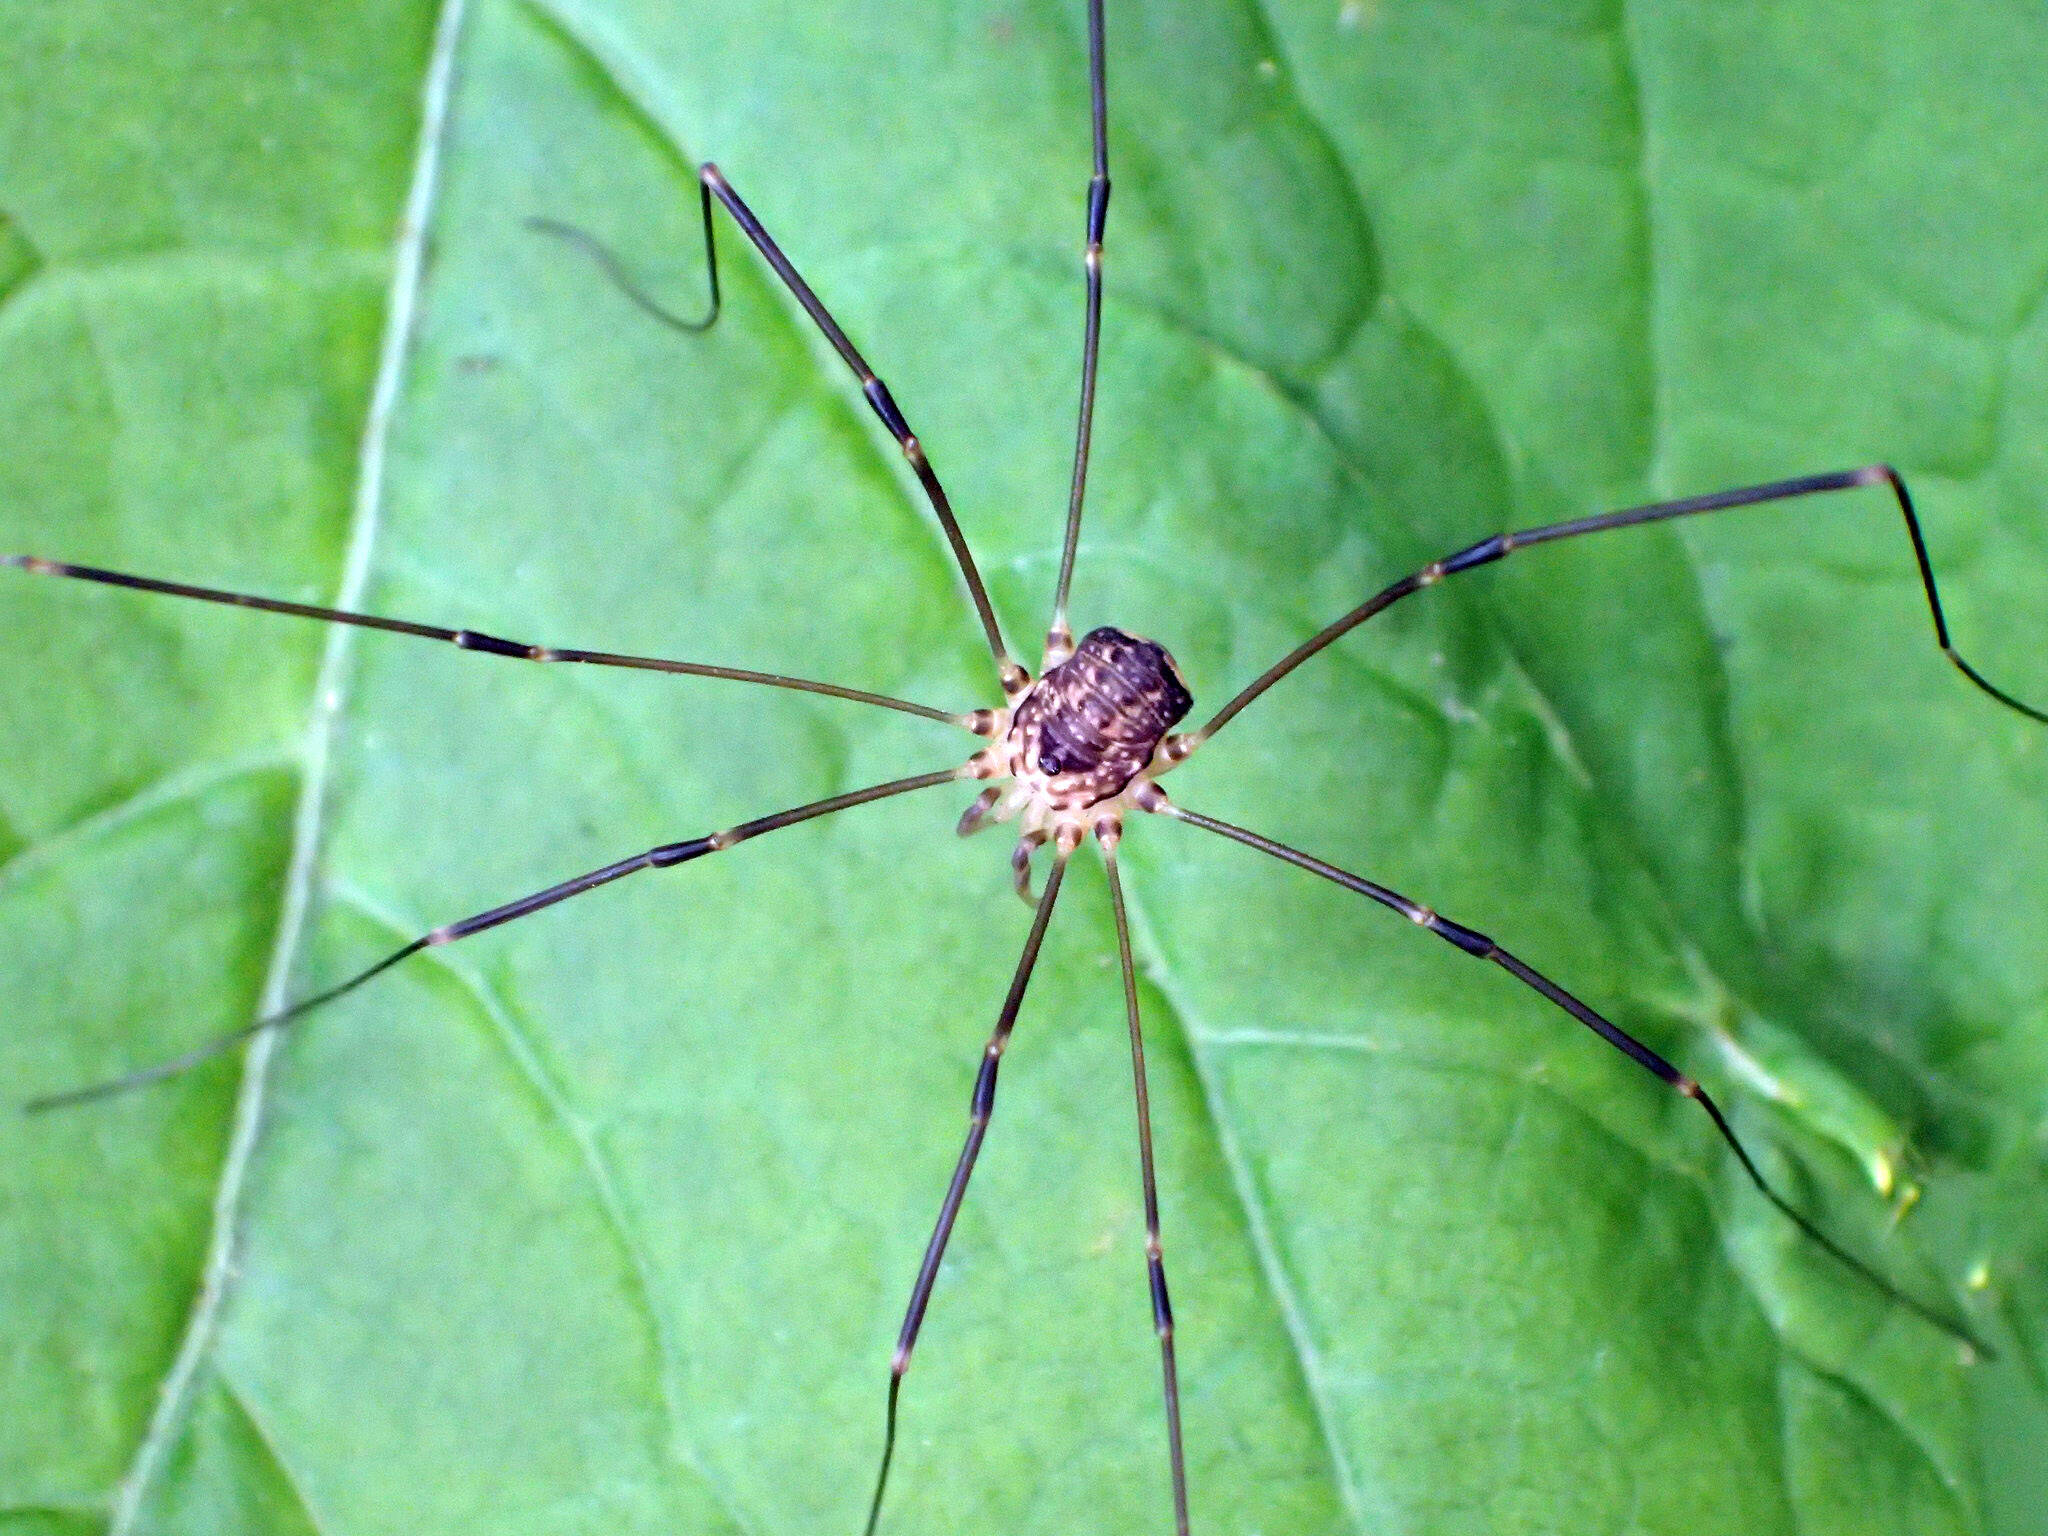 The daddy longlegs Nelima paessleri is abundant in Kenai Peninsula forests. It commonly enters crawl spaces in the fall. (Photo by Matt Bowser/UWFWS)